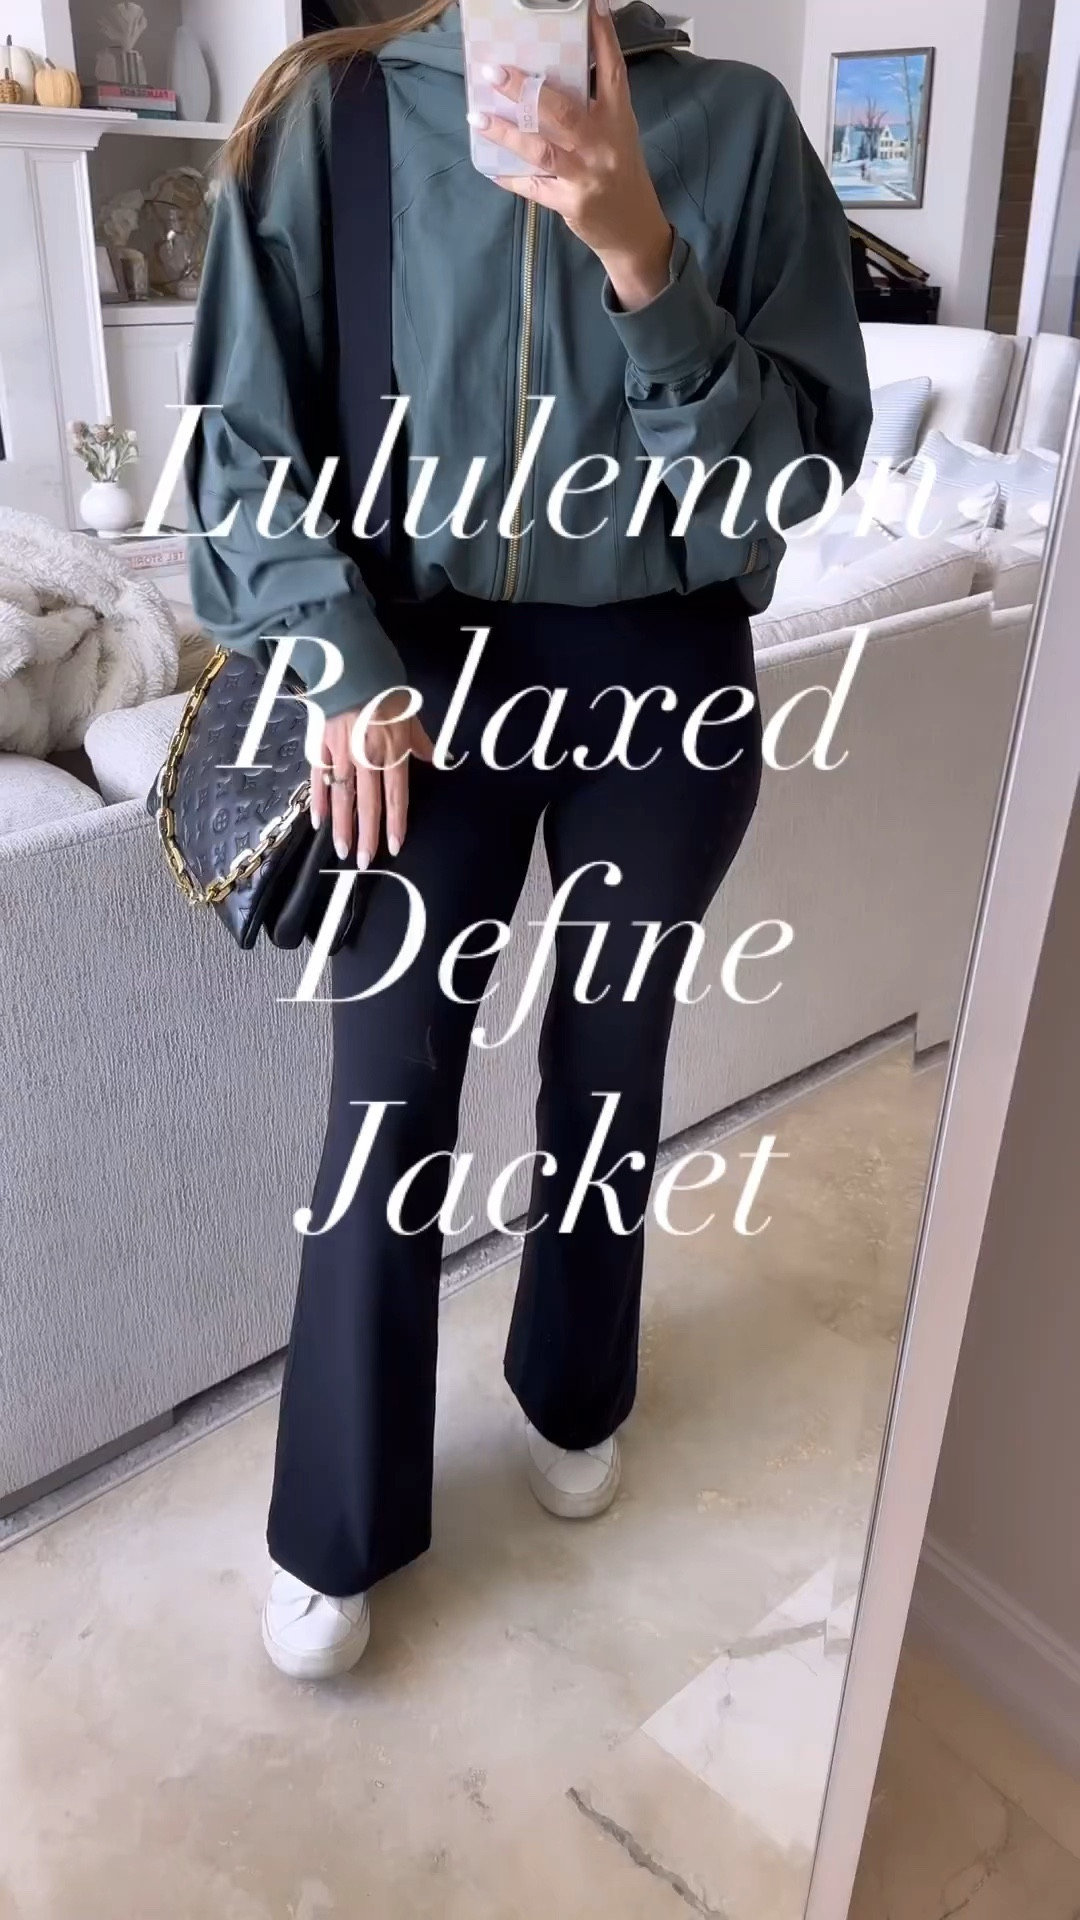 Define Relaxed-Fit Jacket *Luon